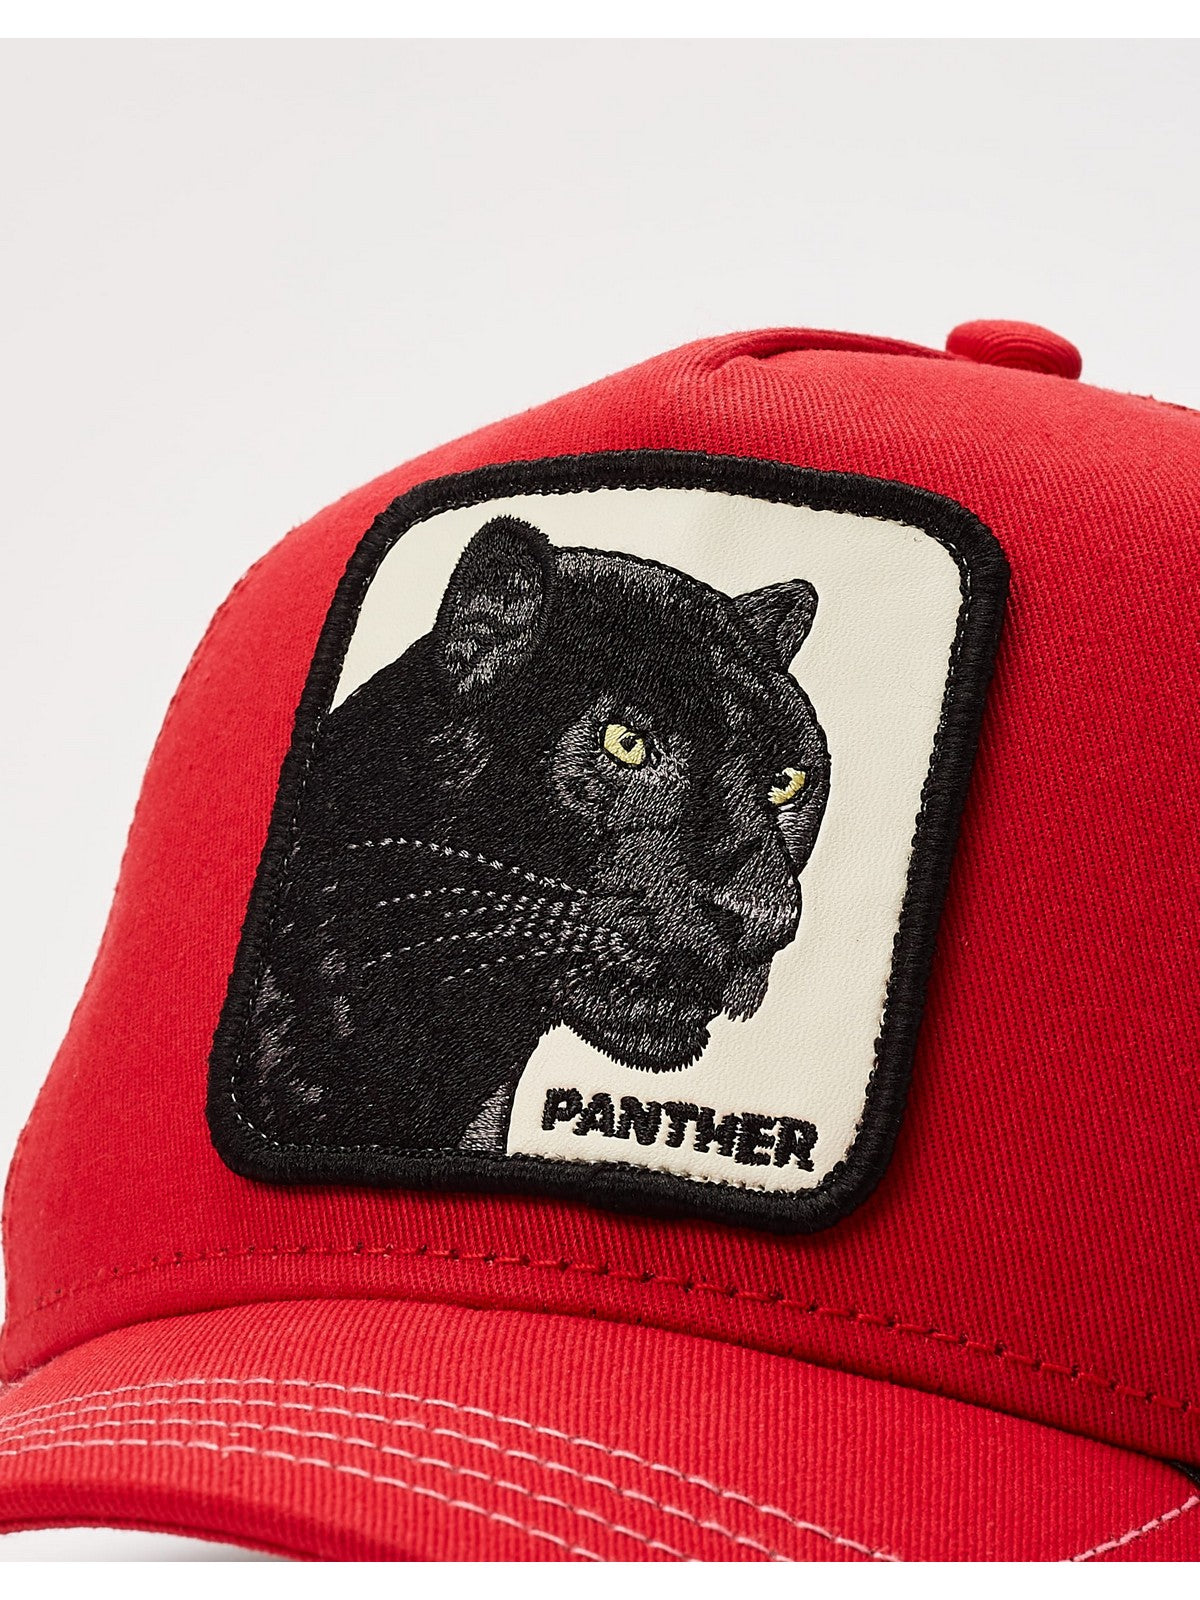 GOORIN BROS Chapeau homme The panther 101-0381-RED Rouge